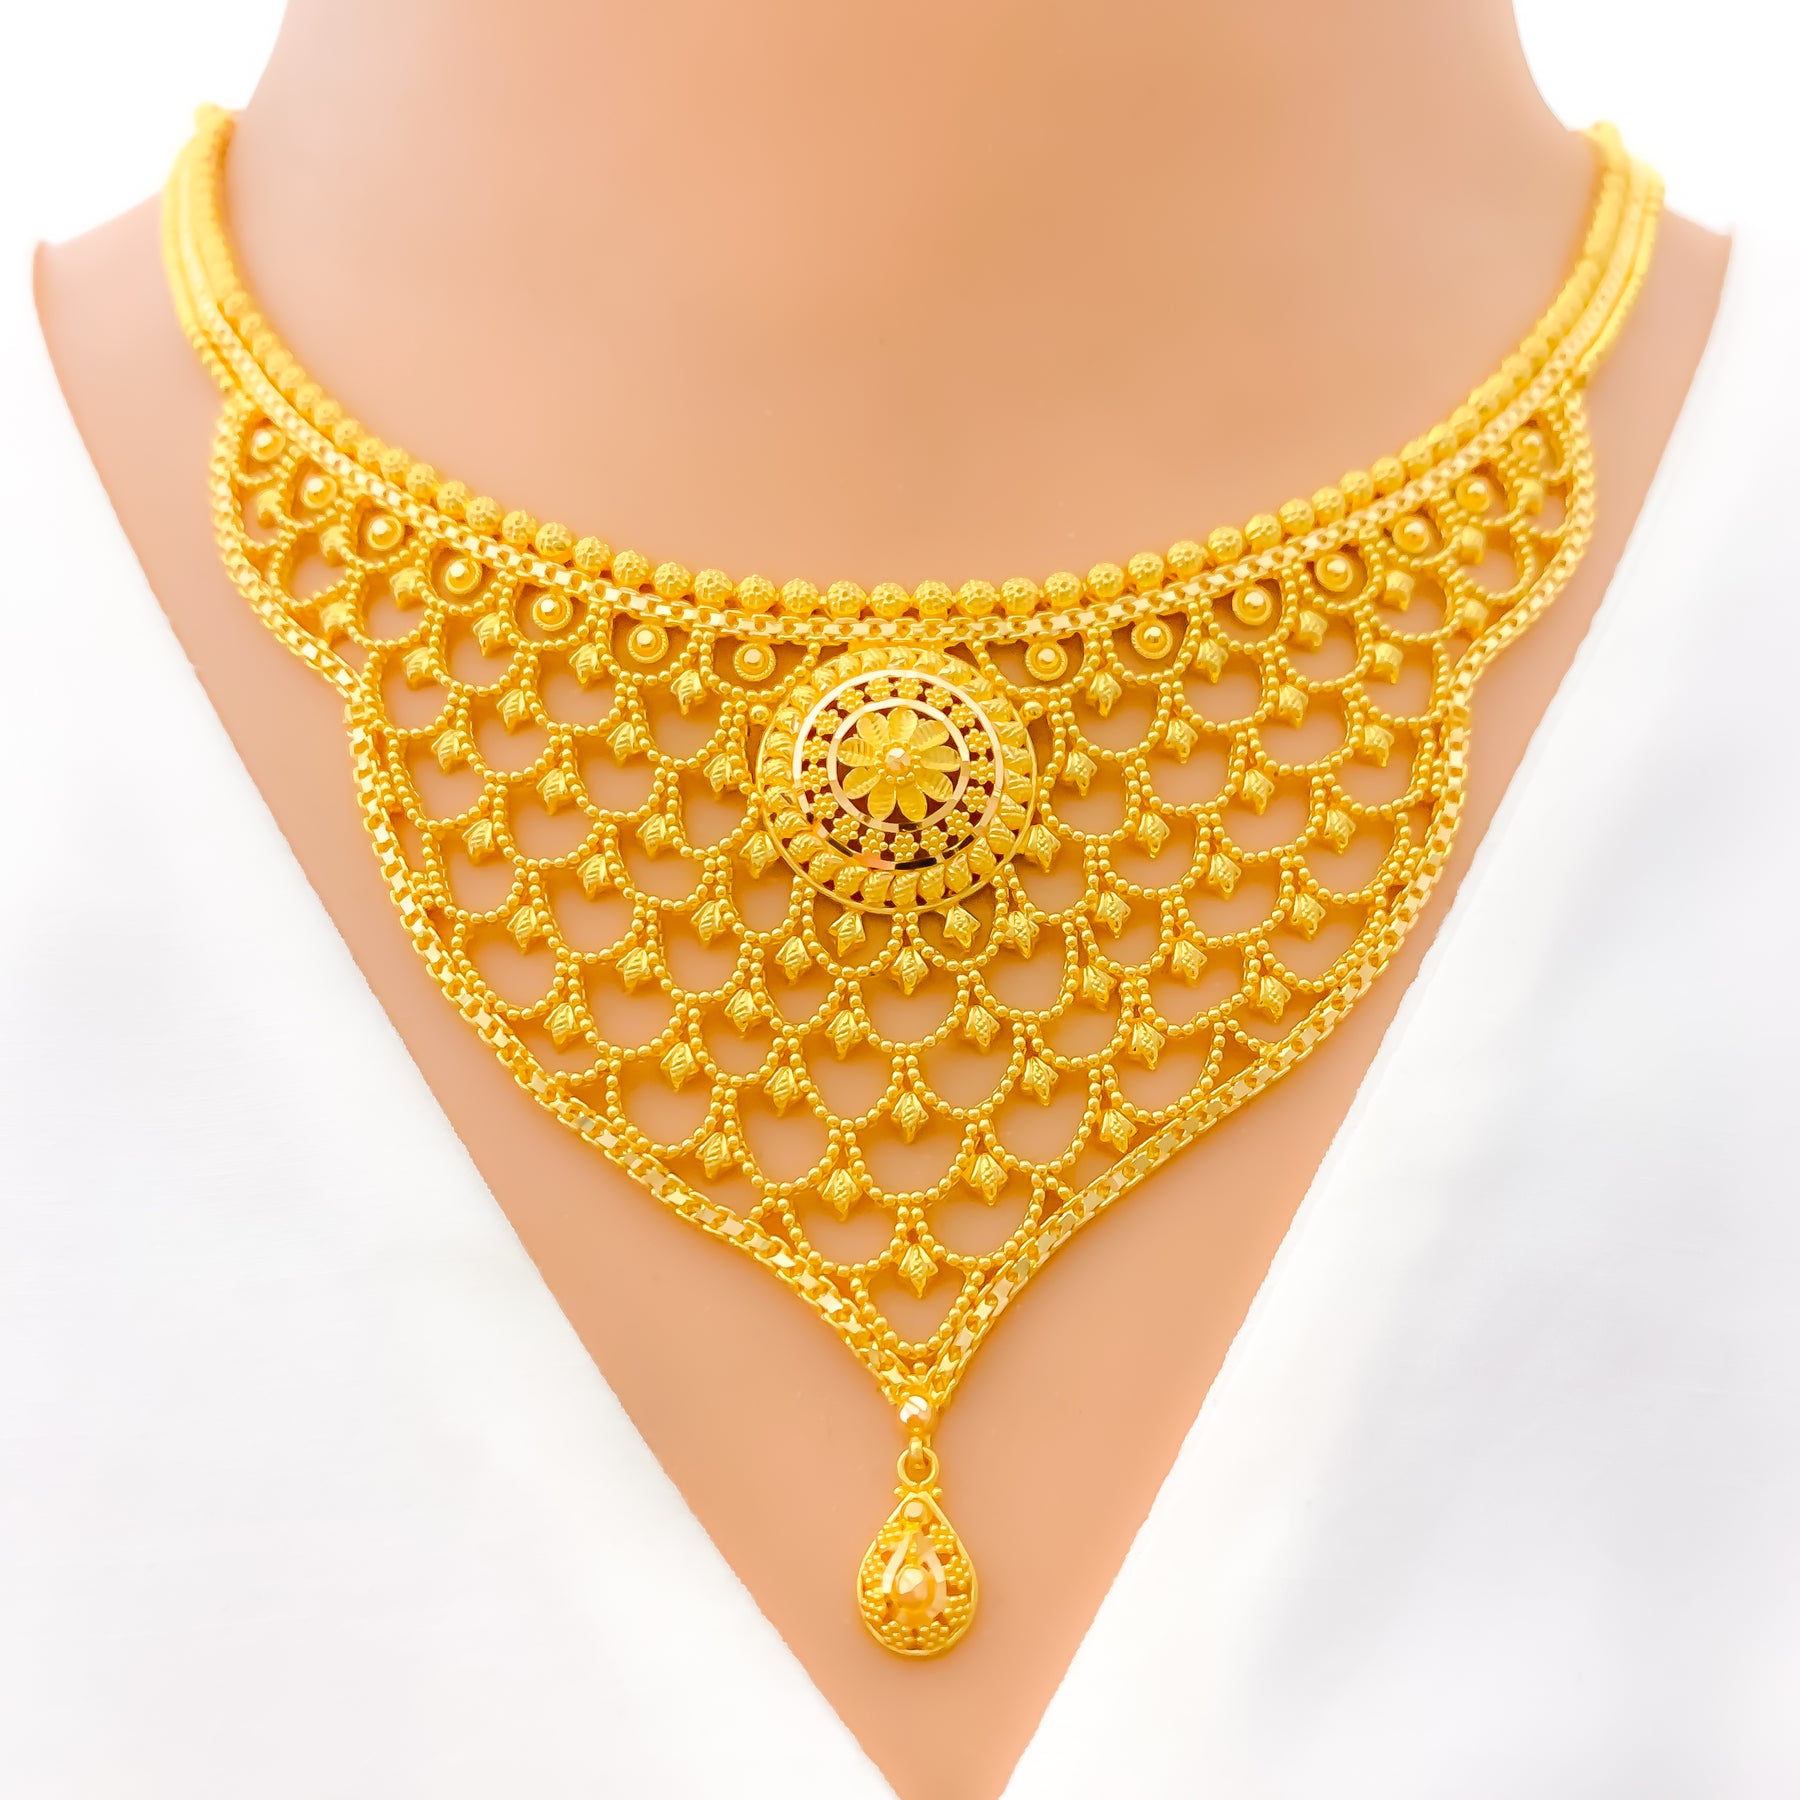 Alizé - 22K Gold Plated Long Chain, Gulaal Ethnic Indian Designer Jewels, Buy Necklace Online